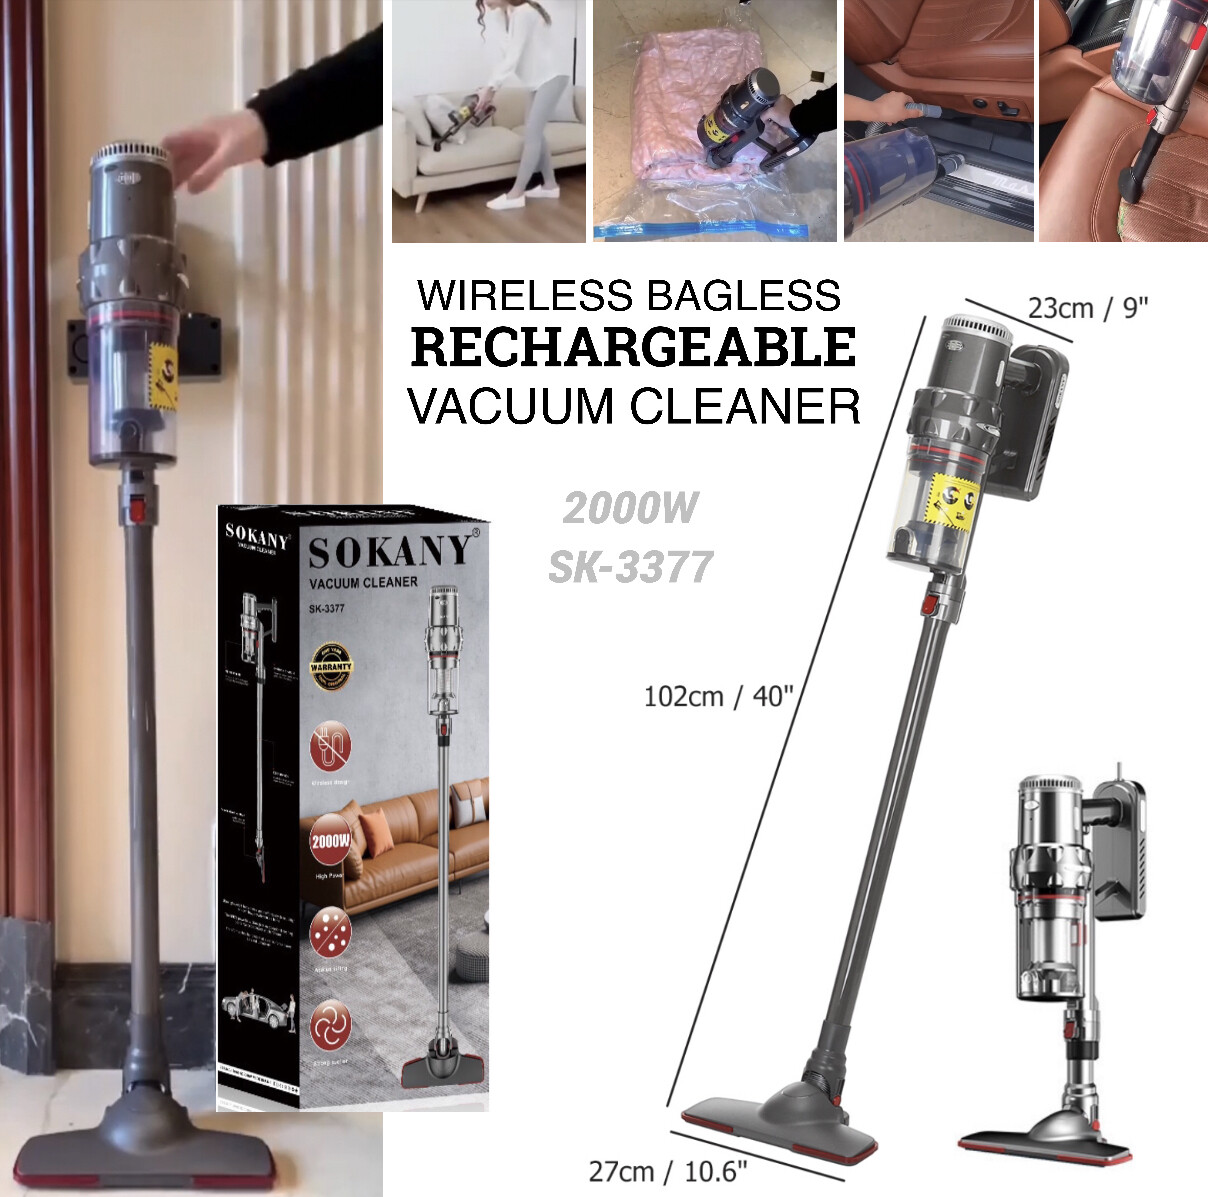 SOKANY SK-3377 Smart Home 2000W Cordless Wireless Handheld Vacuum Cleaner 18KPa Suction Power Removable Battery 1.1L Dust Cup